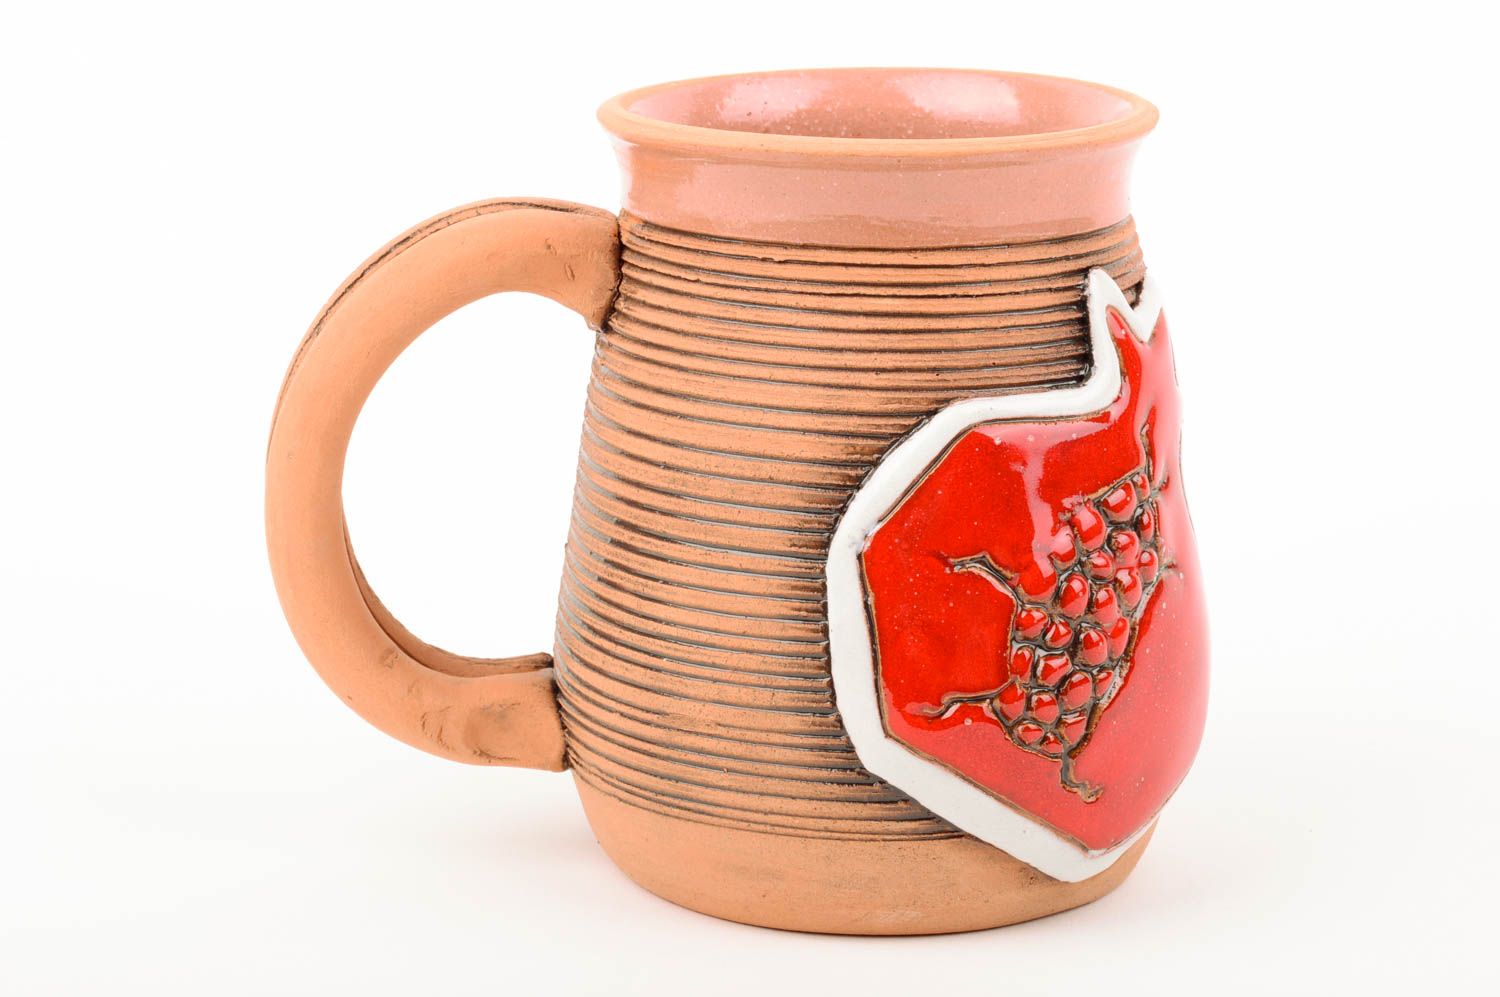 Unusual handmade ceramic beer mug pottery works kitchen supplies gifts for men photo 3